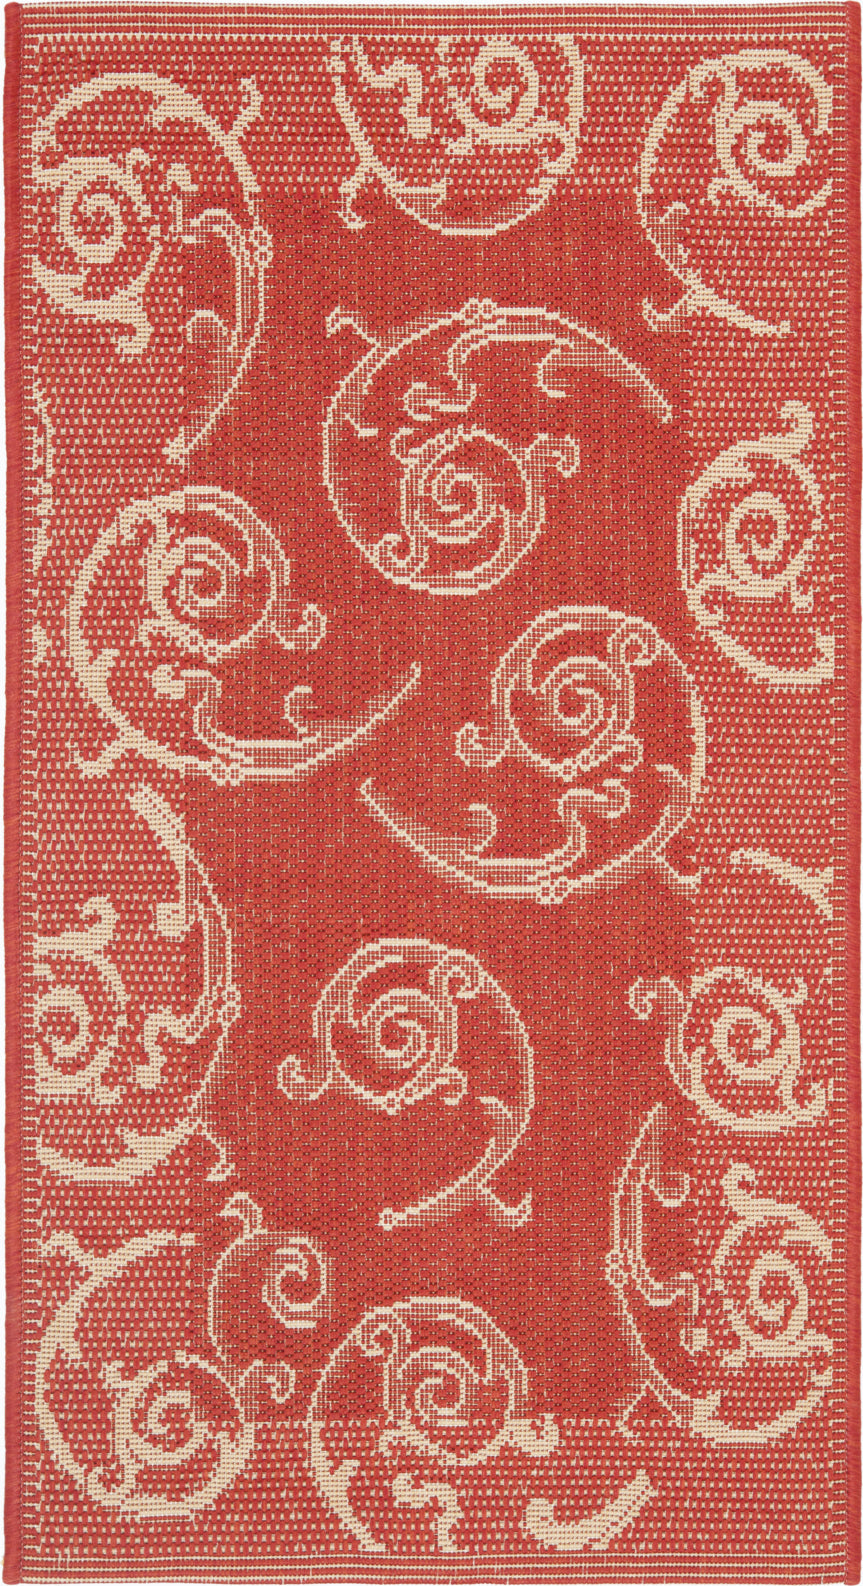 Safavieh Courtyard CY2665 Red/Natural Area Rug main image